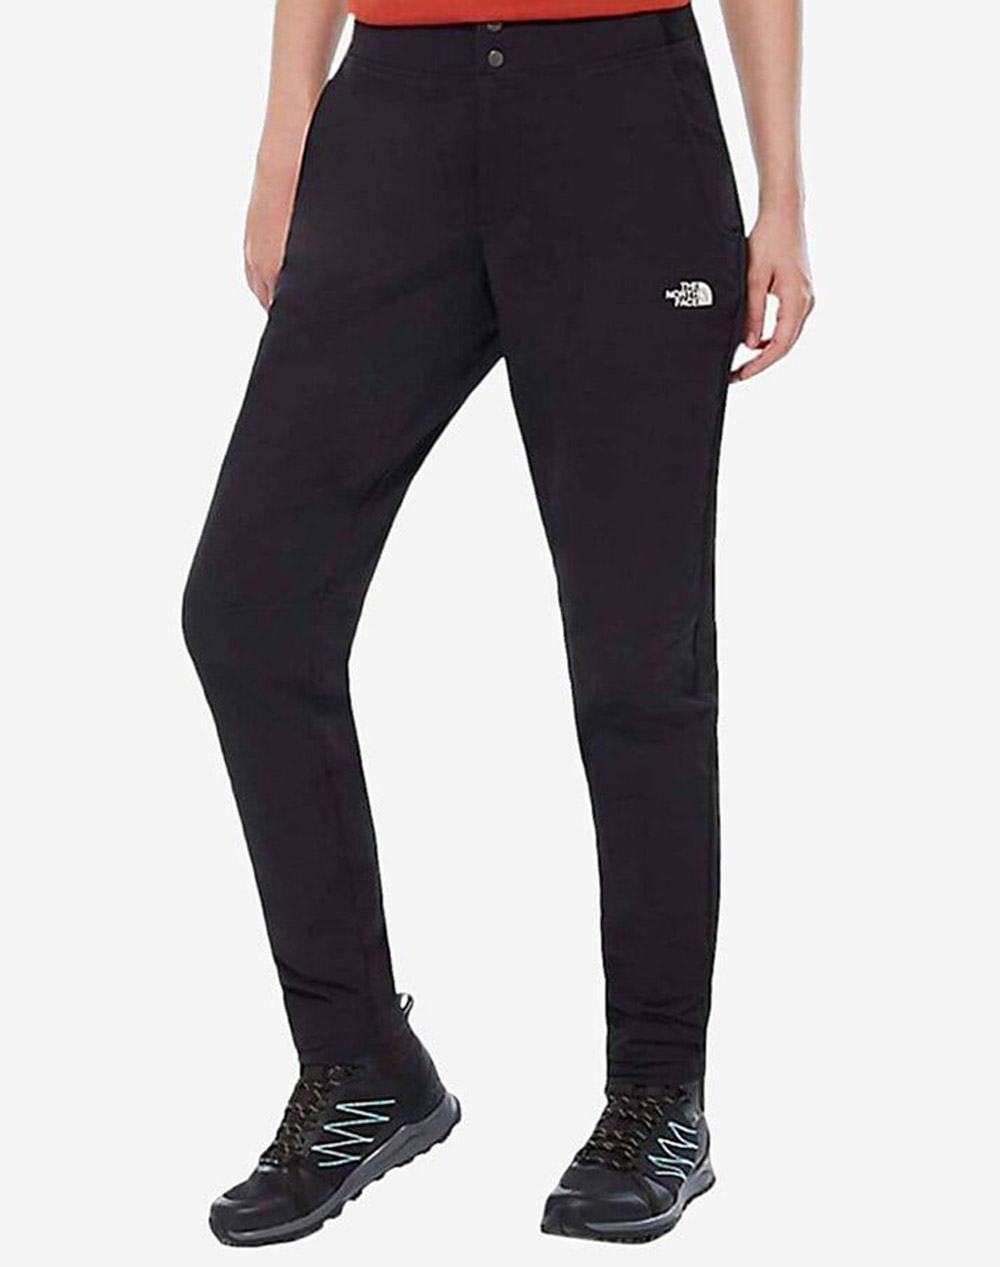 THE NORTH FACE W QUEST SOFTSHELL PANT TNF NF0A3Y1L-NFJK3 Black 3710ATNFA2040001_XR22063